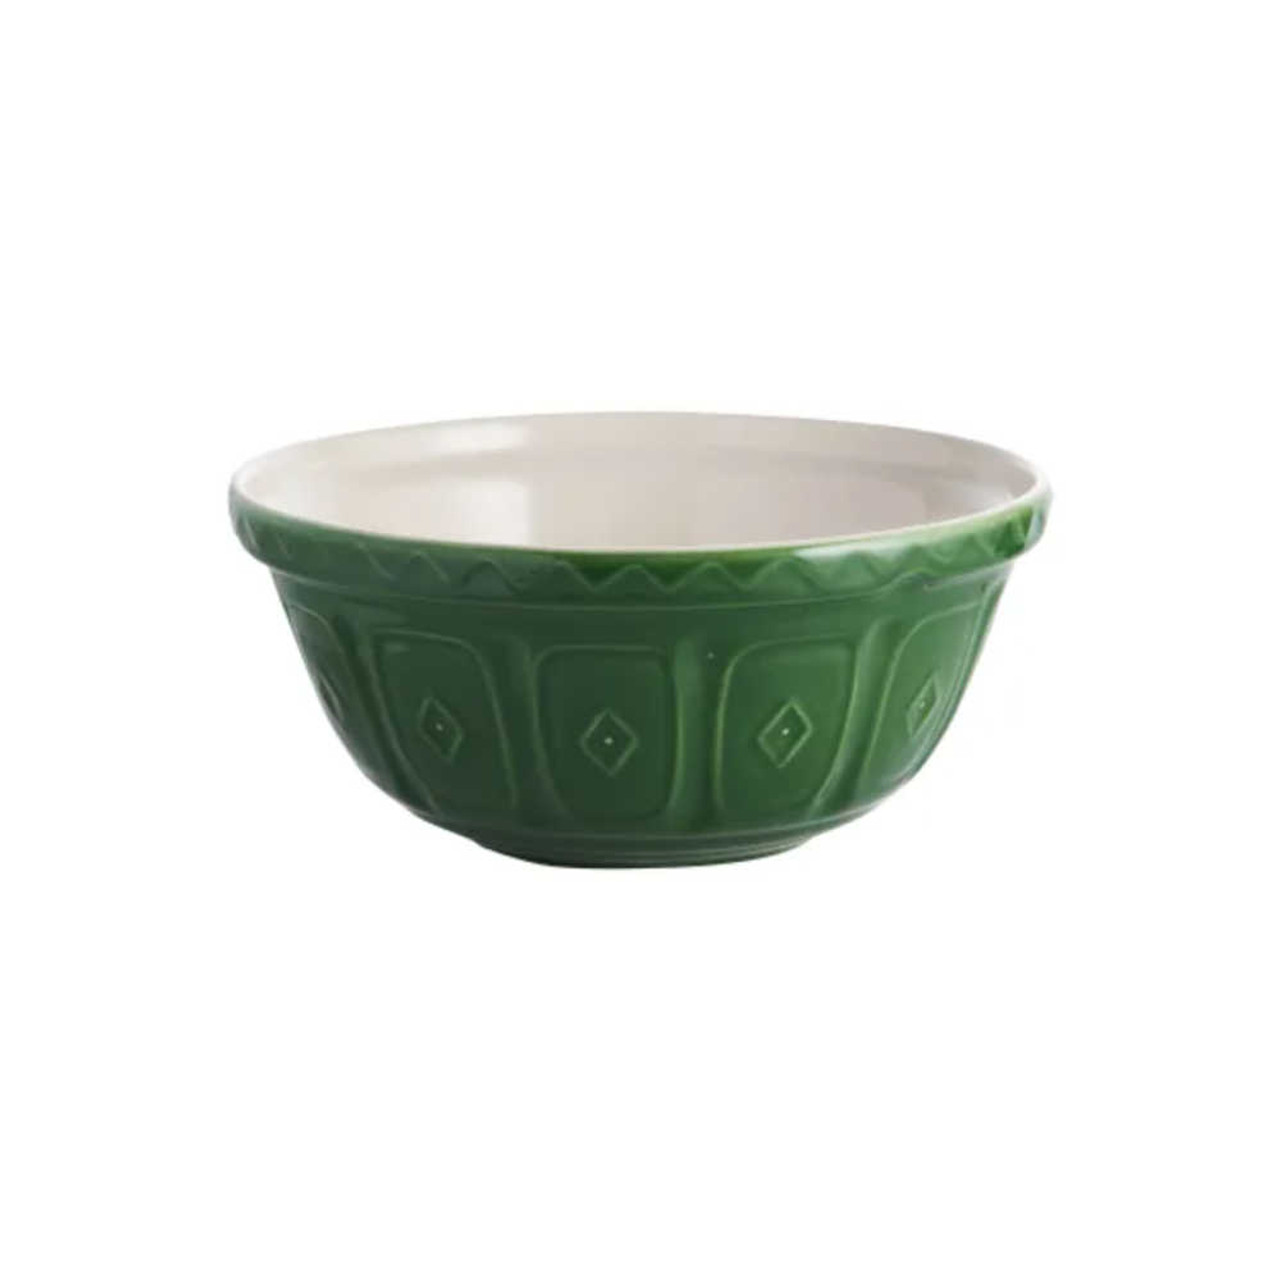 https://cdn11.bigcommerce.com/s-hccytny0od/images/stencil/1280x1280/products/5012/21346/Mason_Cash_Color_Mix_Green_11.5-Inch_Mixing_Bowl__82360.1665528808.jpg?c=2?imbypass=on